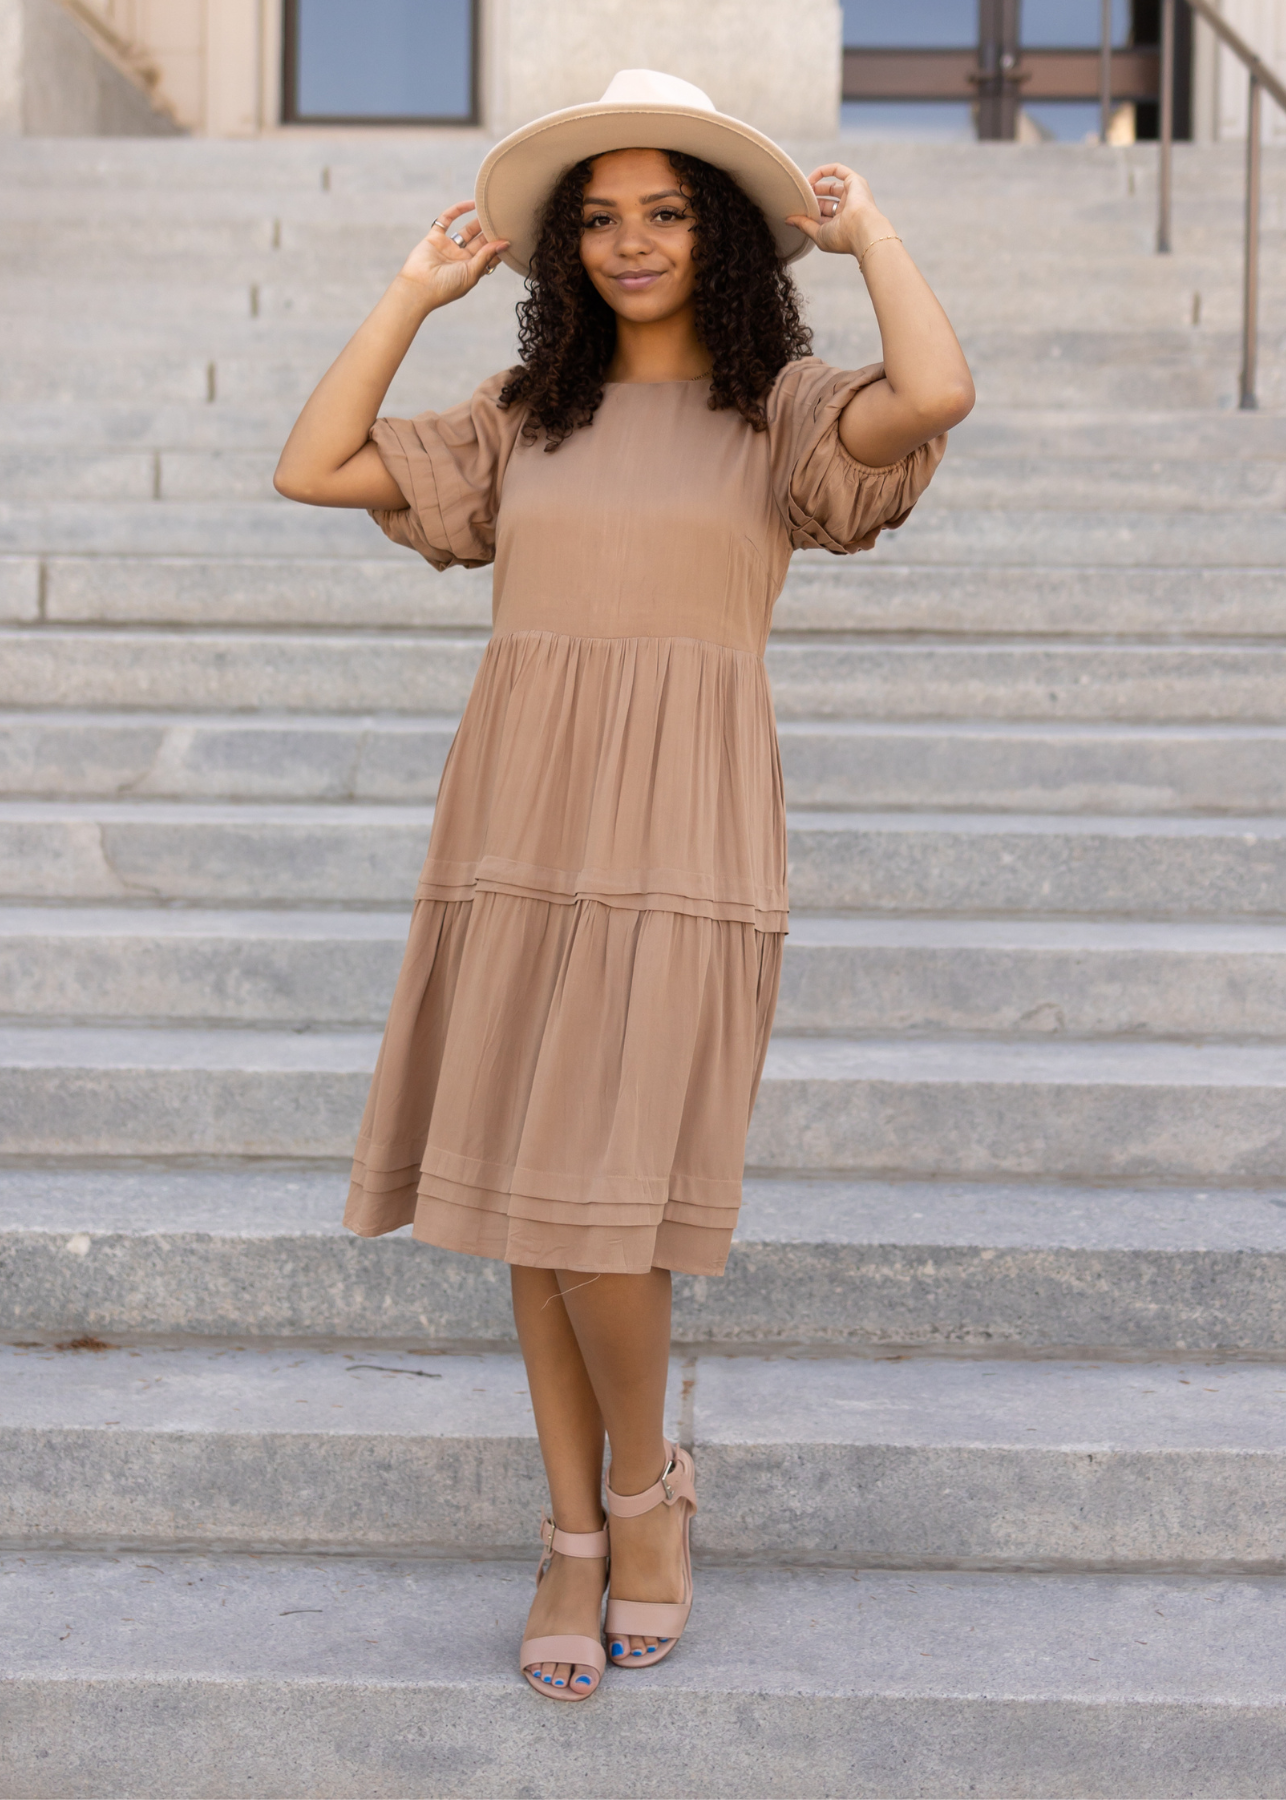 Short sleeve taupe dress with pleats on skirt